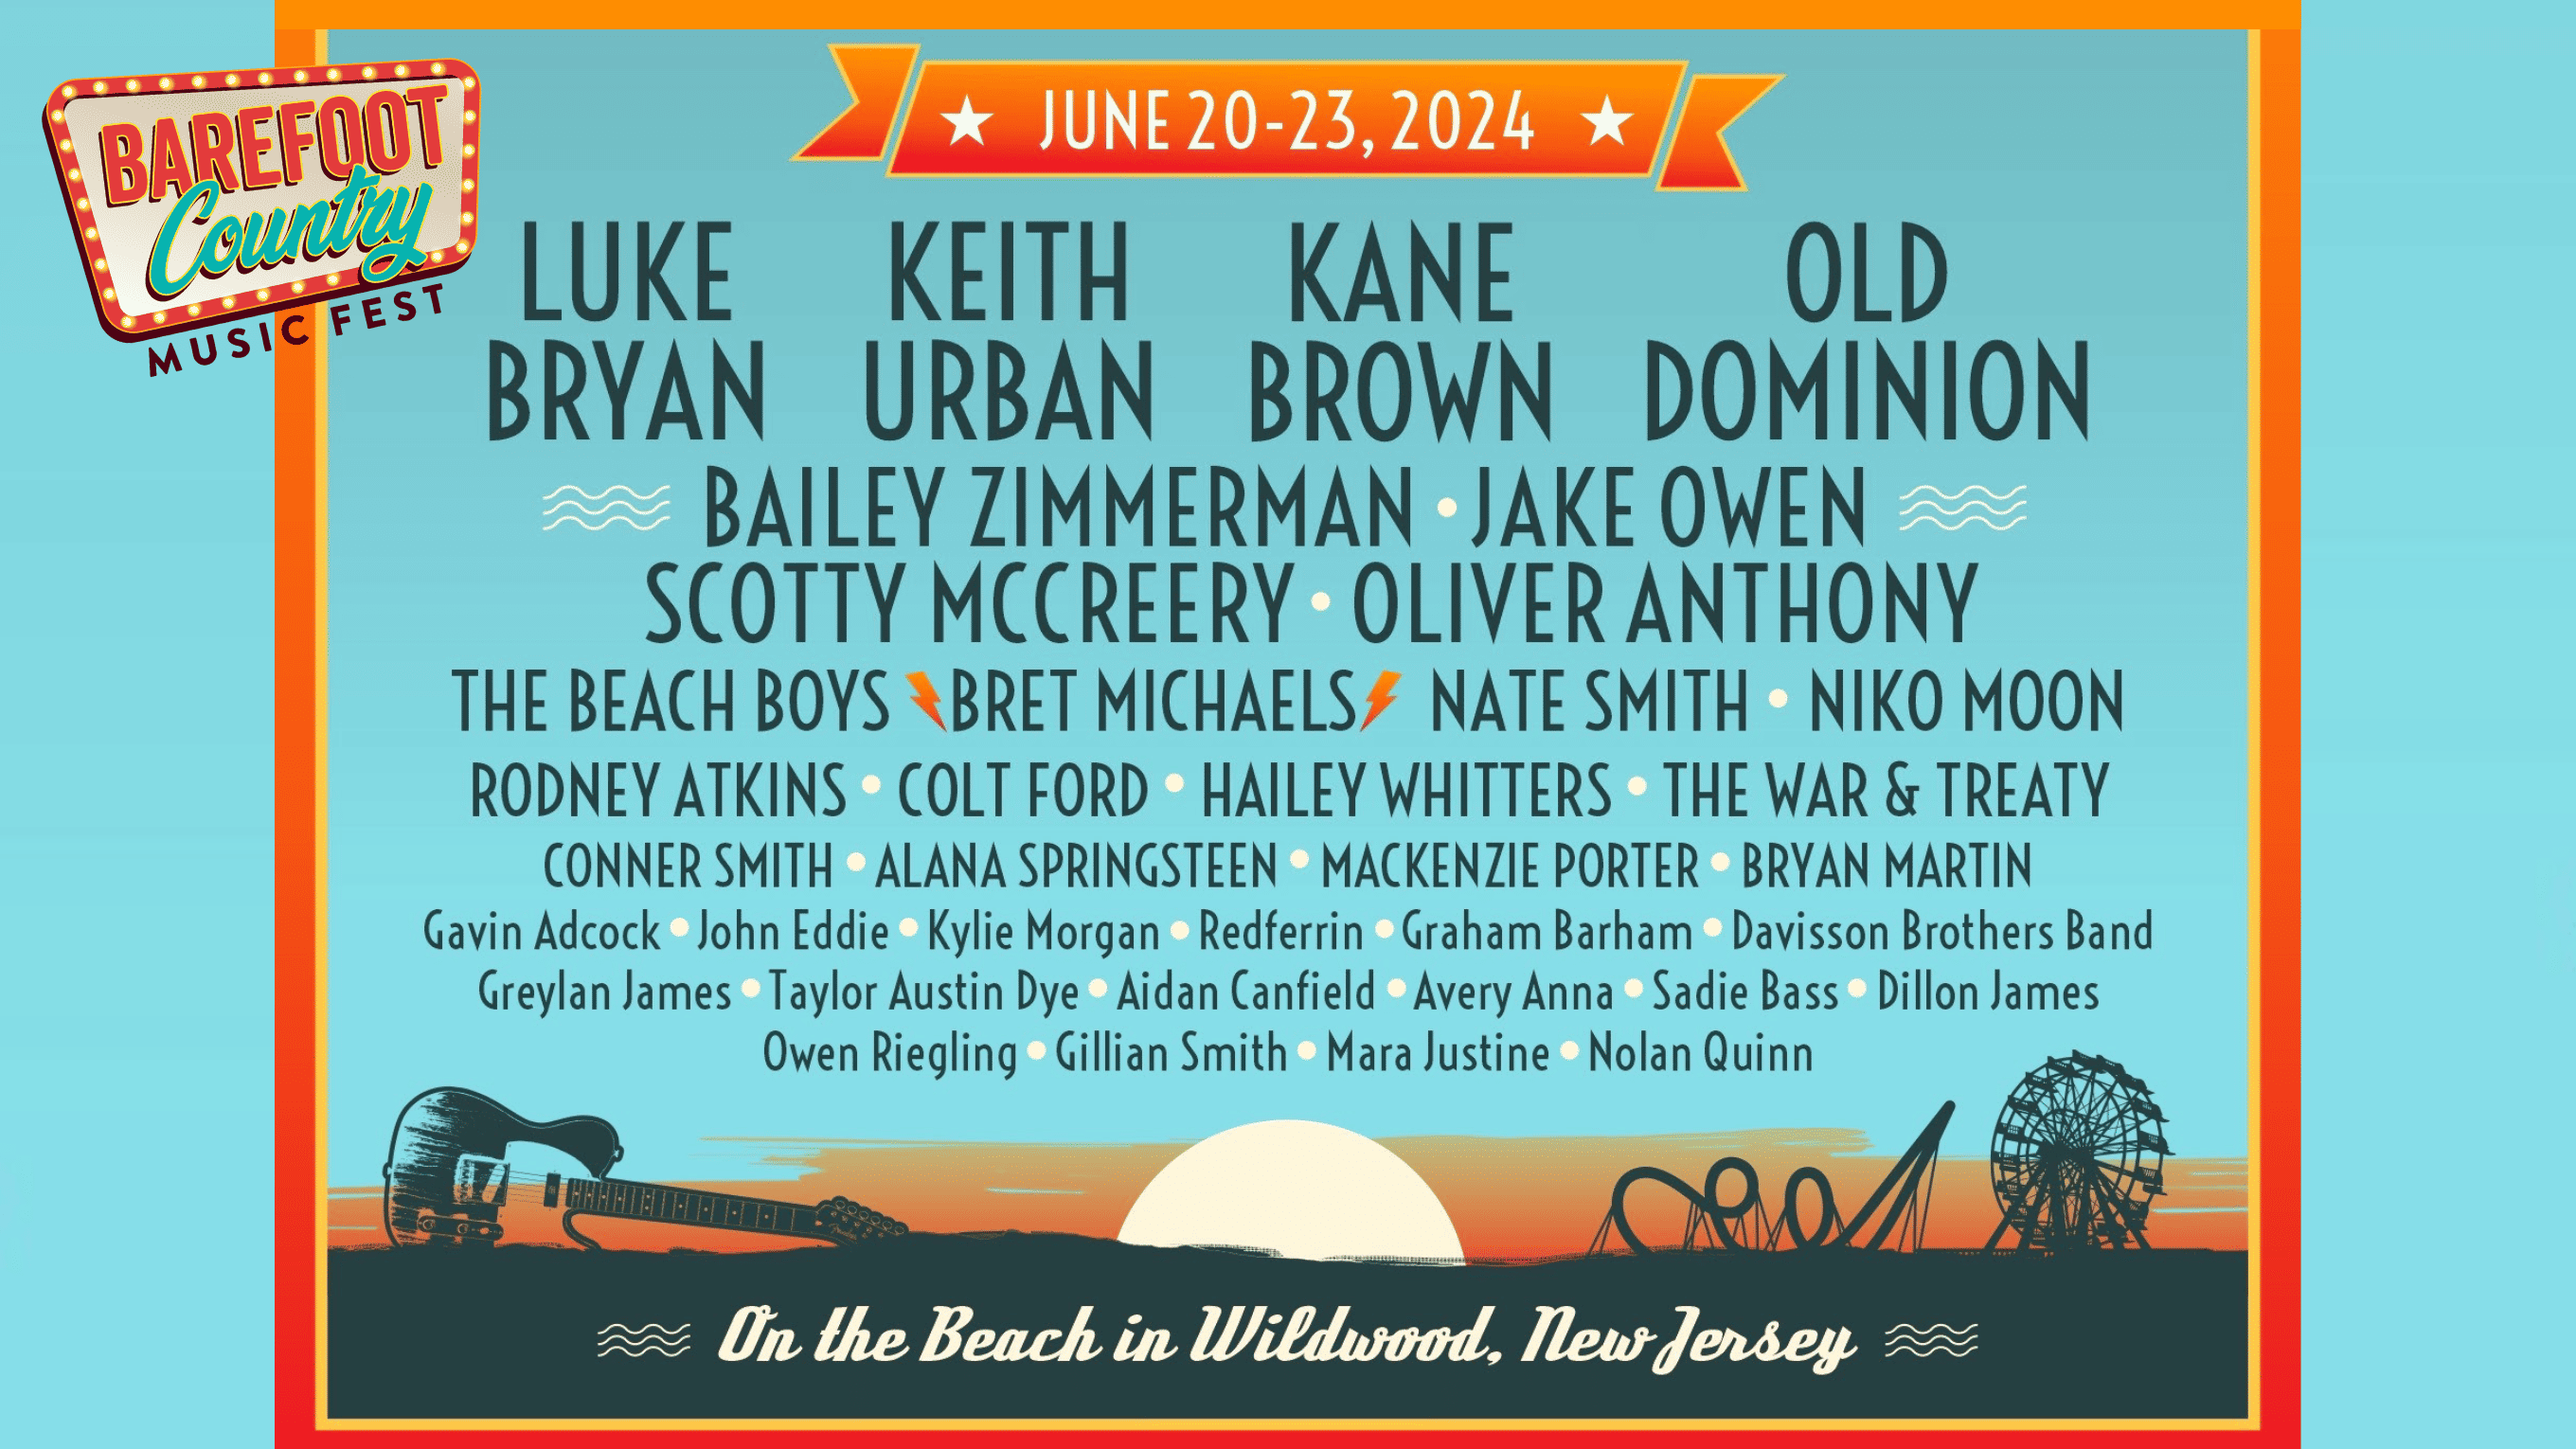 Barefoot Country Music Festival 2024 Lineup!